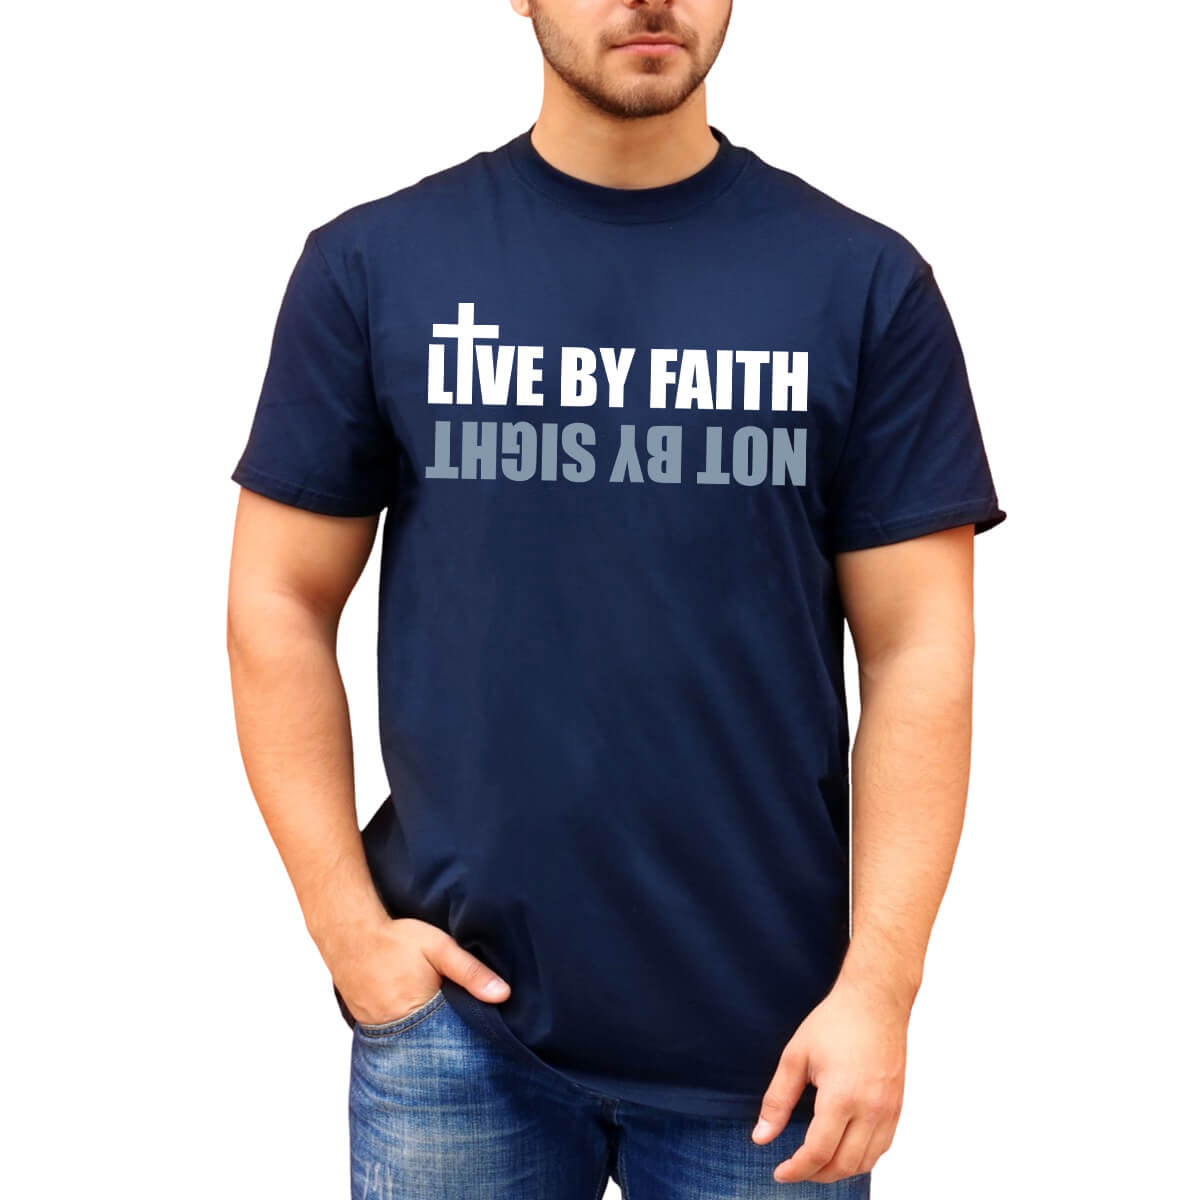 Live By Faith Not By Sight Men's T-Shirt